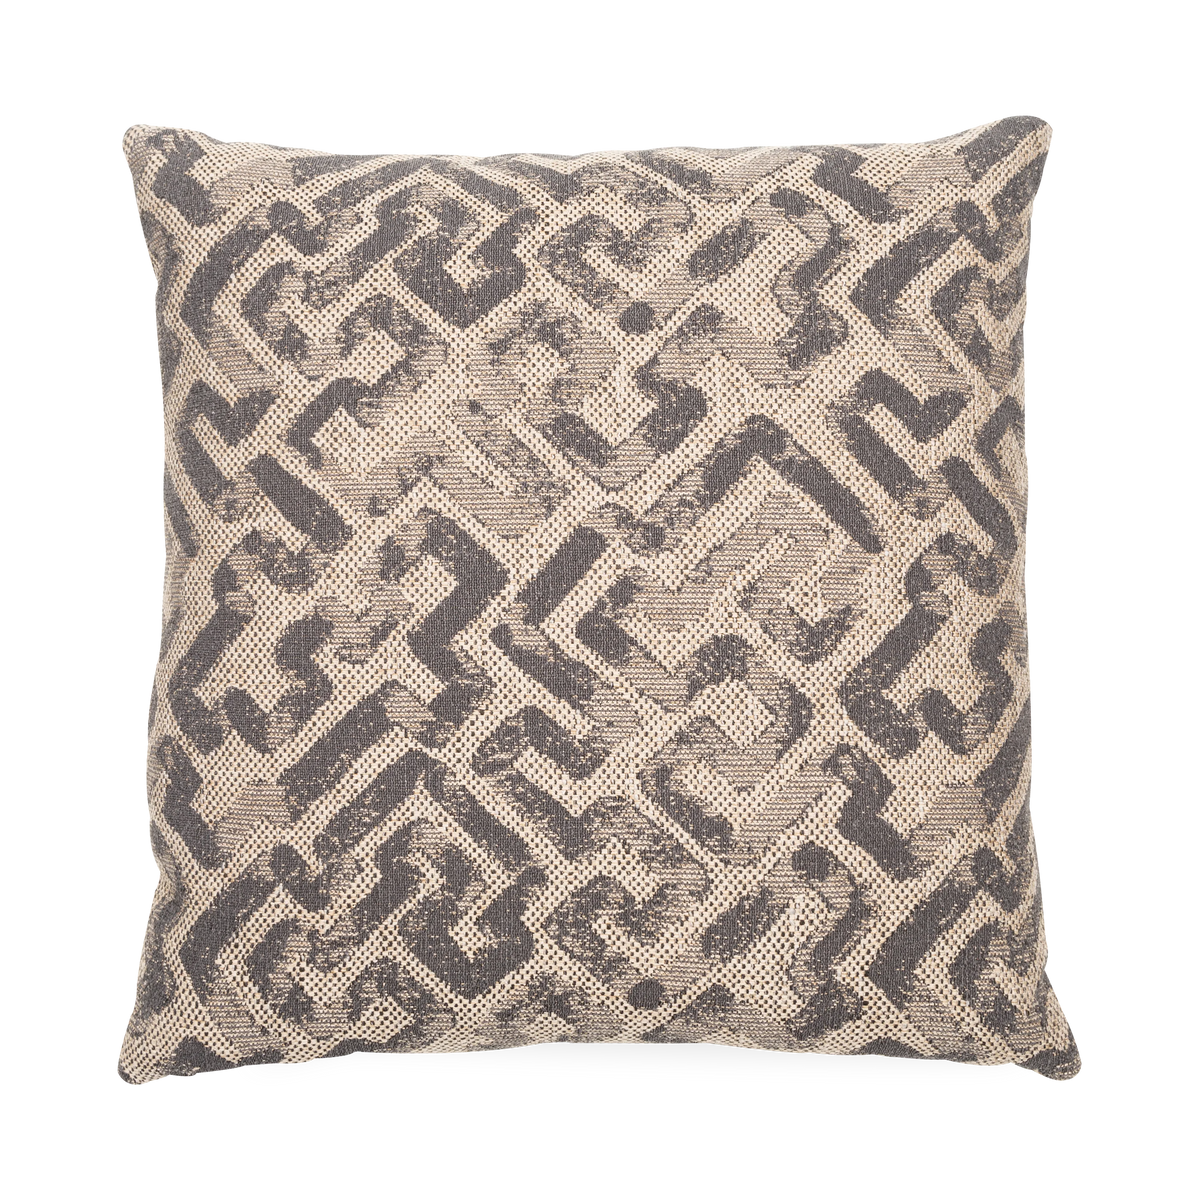 Defined by its faded maze design, the Elody Pillow adds an eye-catching design that provides a creative and unique approach to your bedding and seating décor.